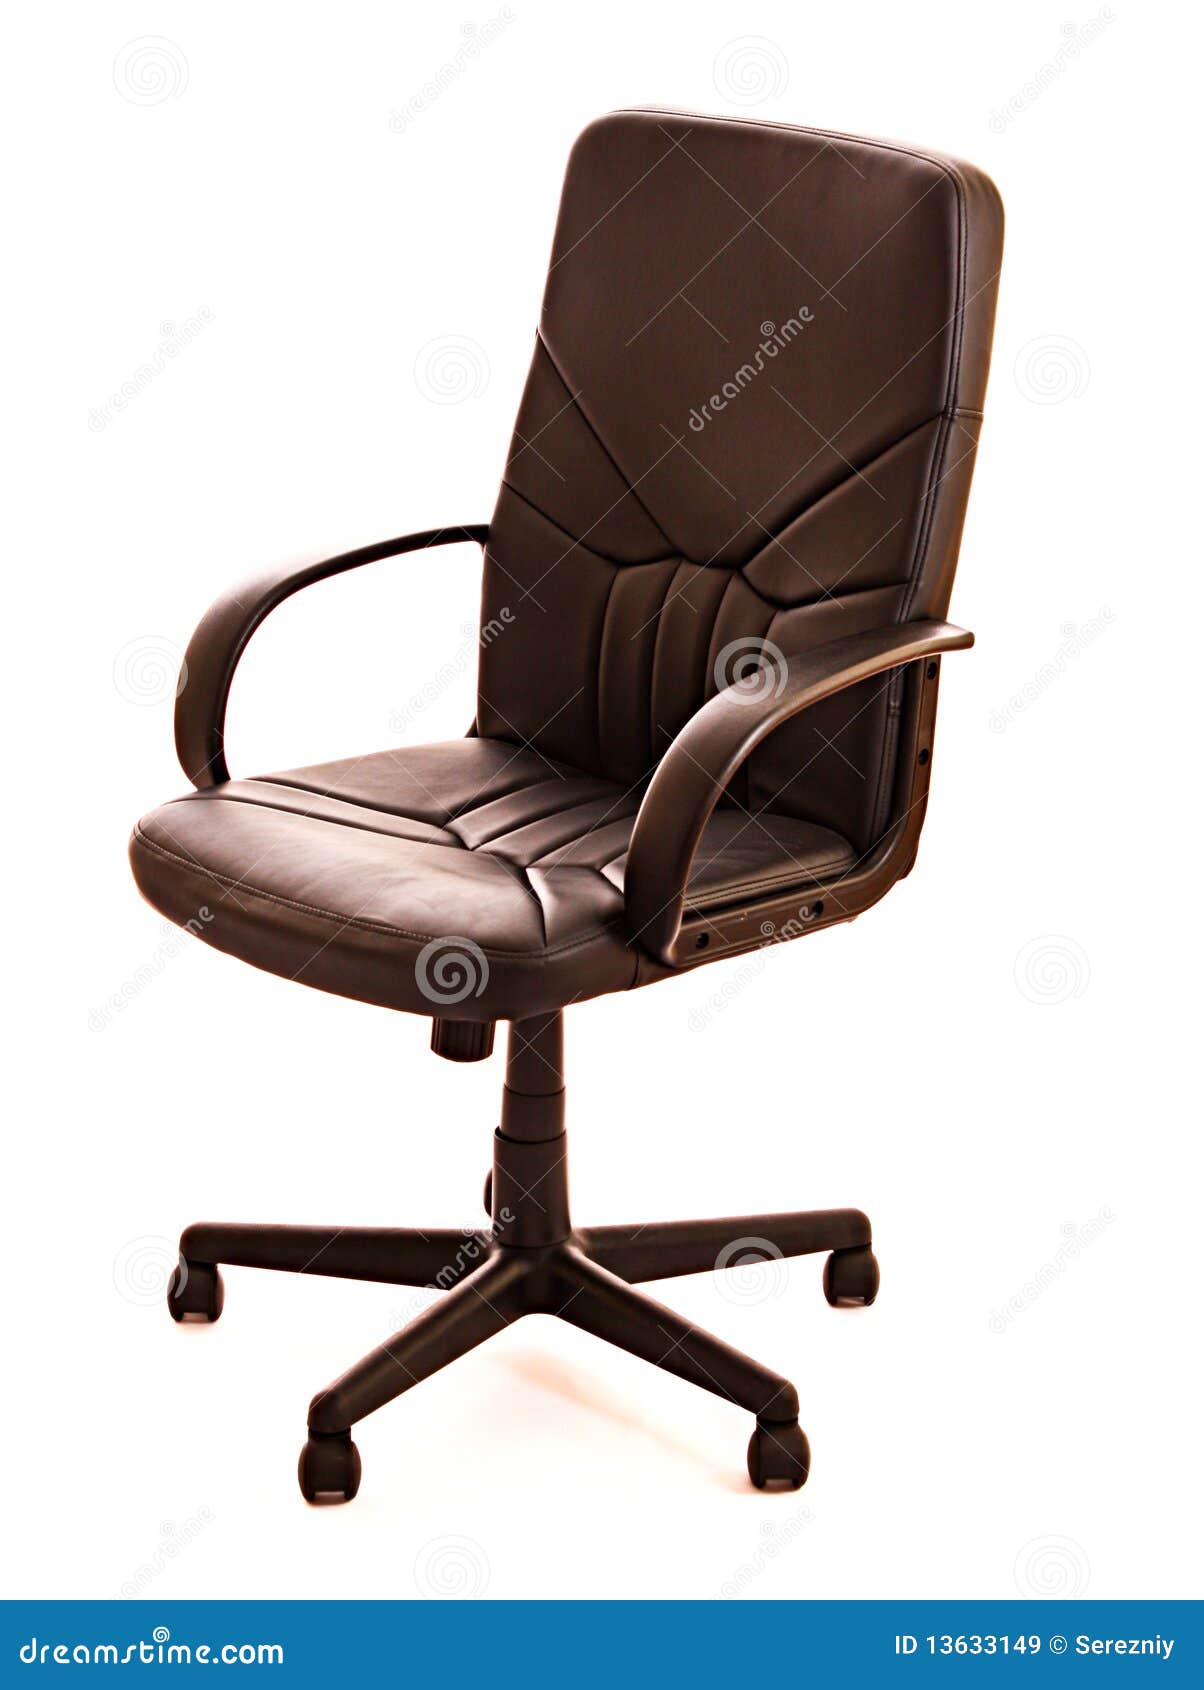 Office chair isolated stock image. Image of sitting, chair - 13633149